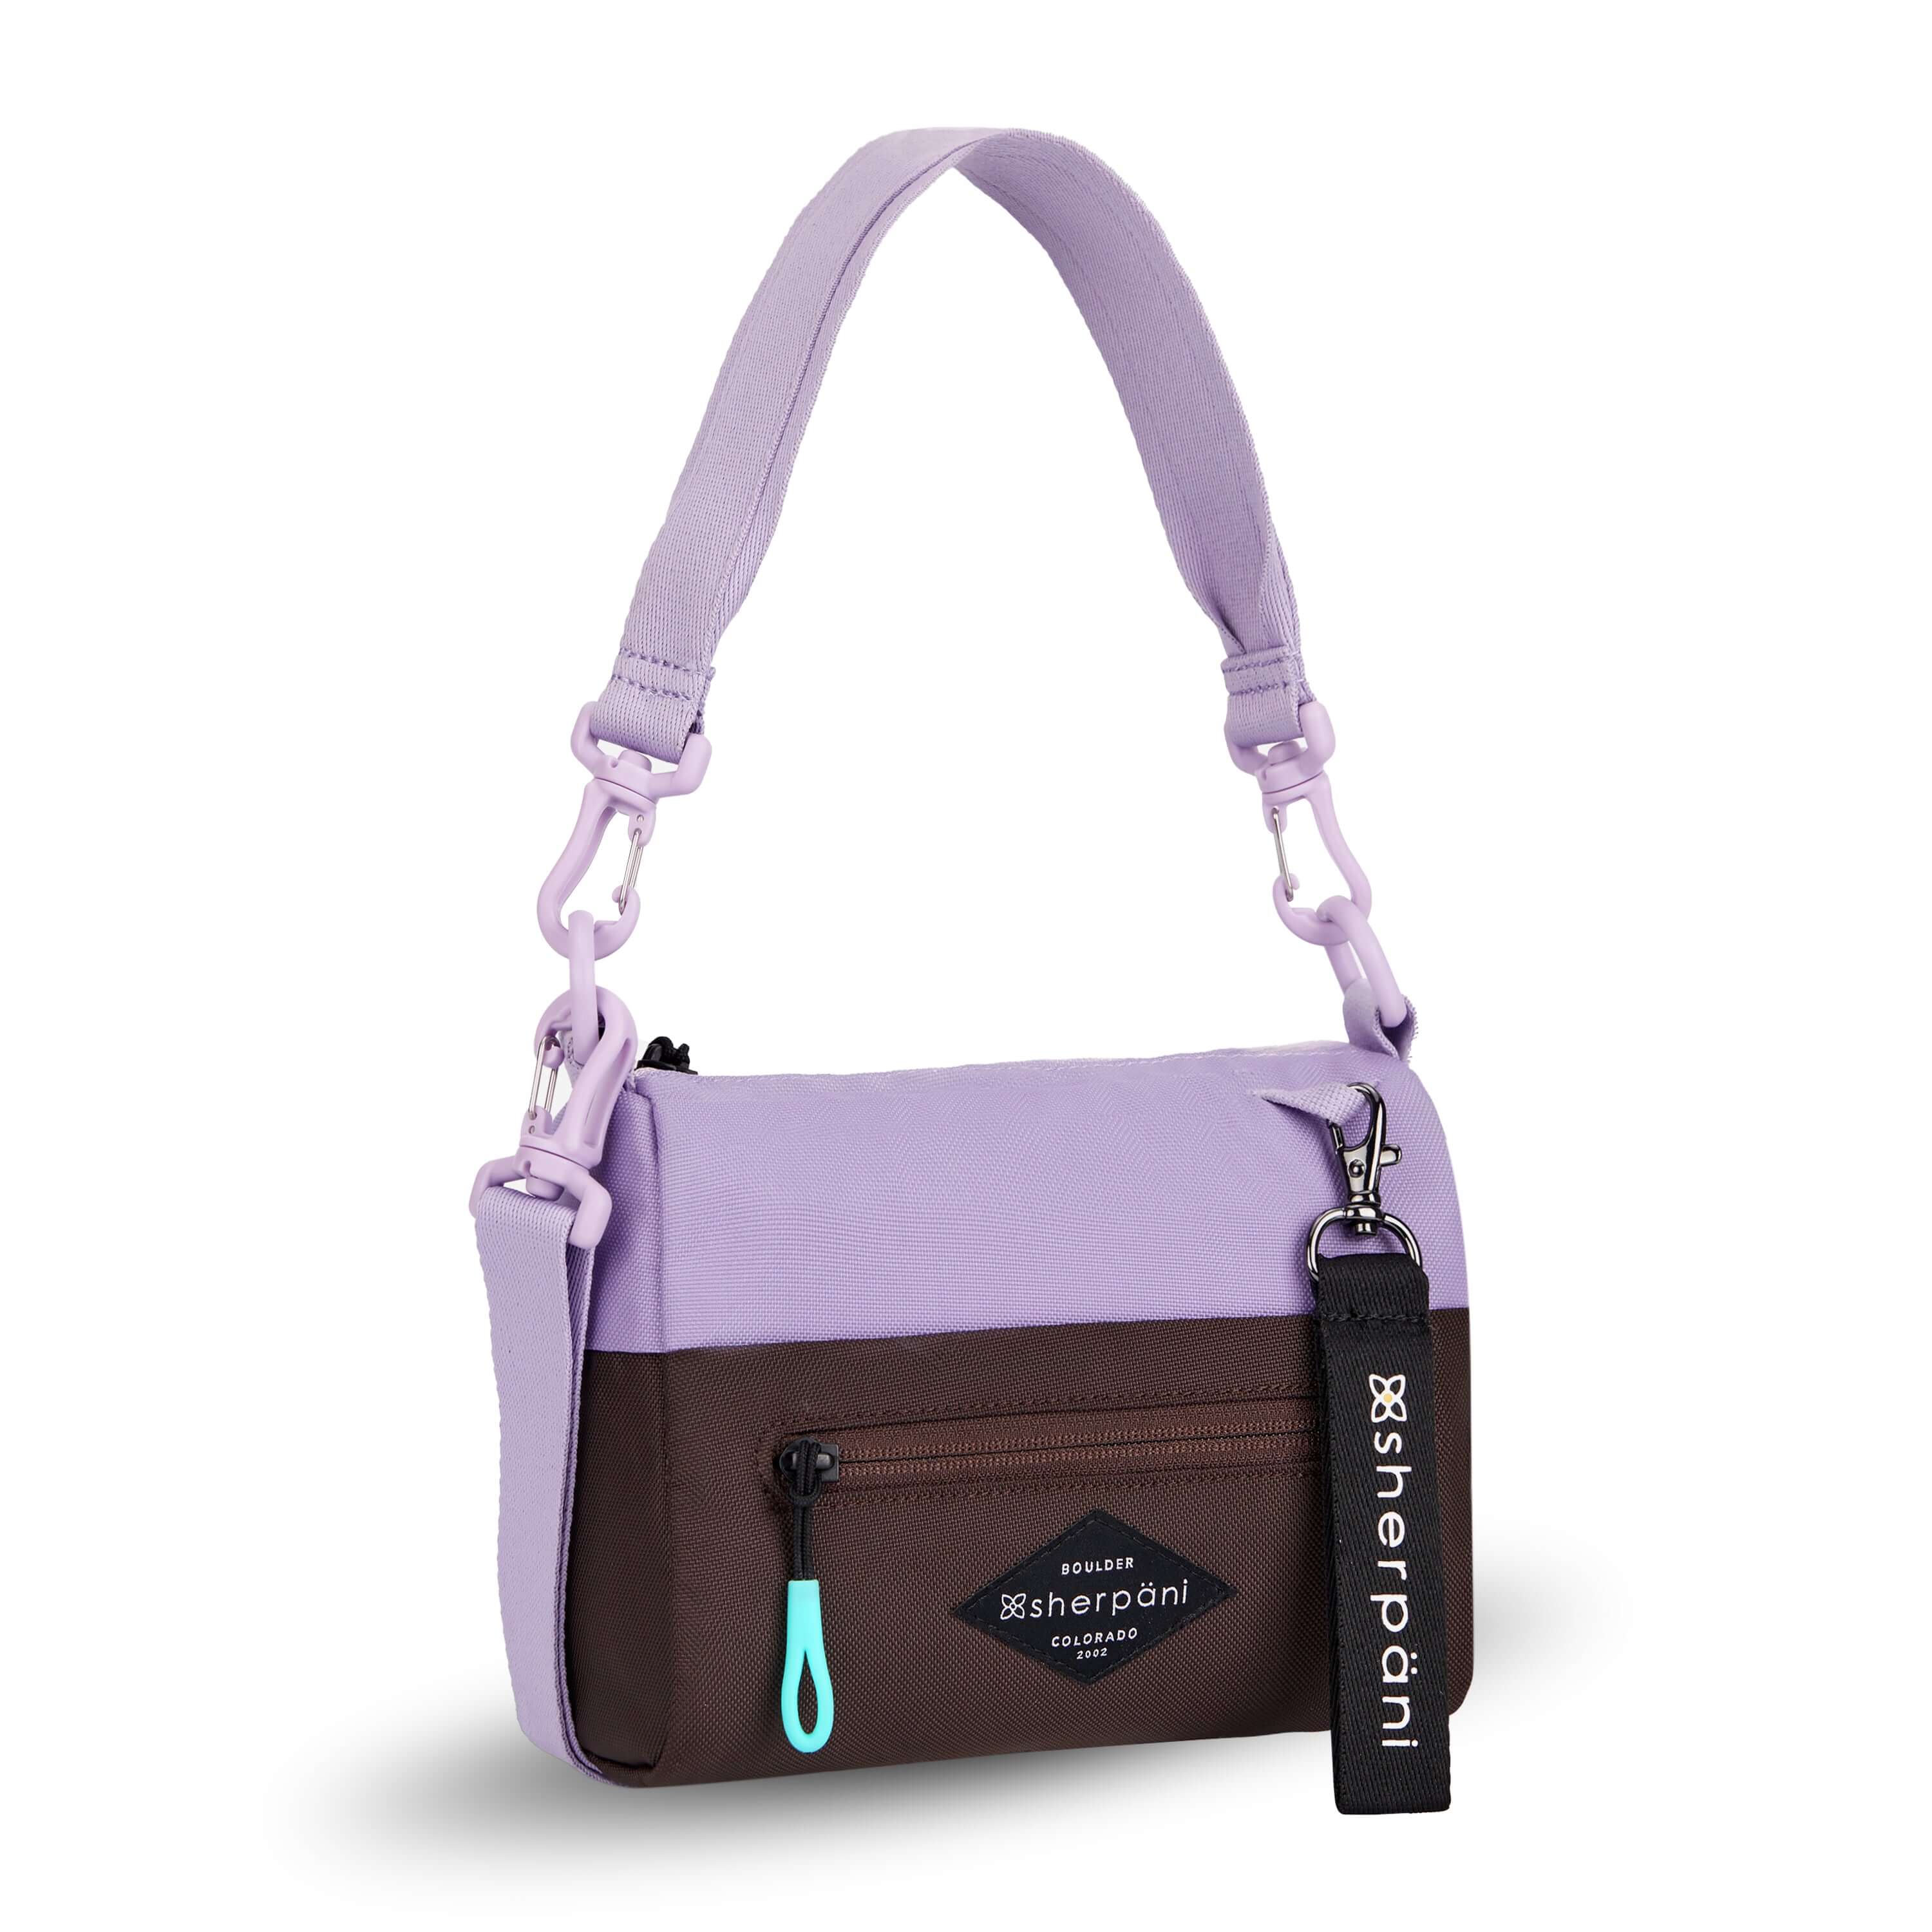 Angled front view of Sherpani's purse, the Skye in Lavender. It is two-toned, the top half of the bag is lavender and the bottom half of the bag is brown. There is an external zipper compartment with an easy-pull zipper accented in aqua. There is a branded Sherpani keychain clipped to the upper right corner. The bag has a detachable short strap and a longer detachable/adjustable crossbody strap. 